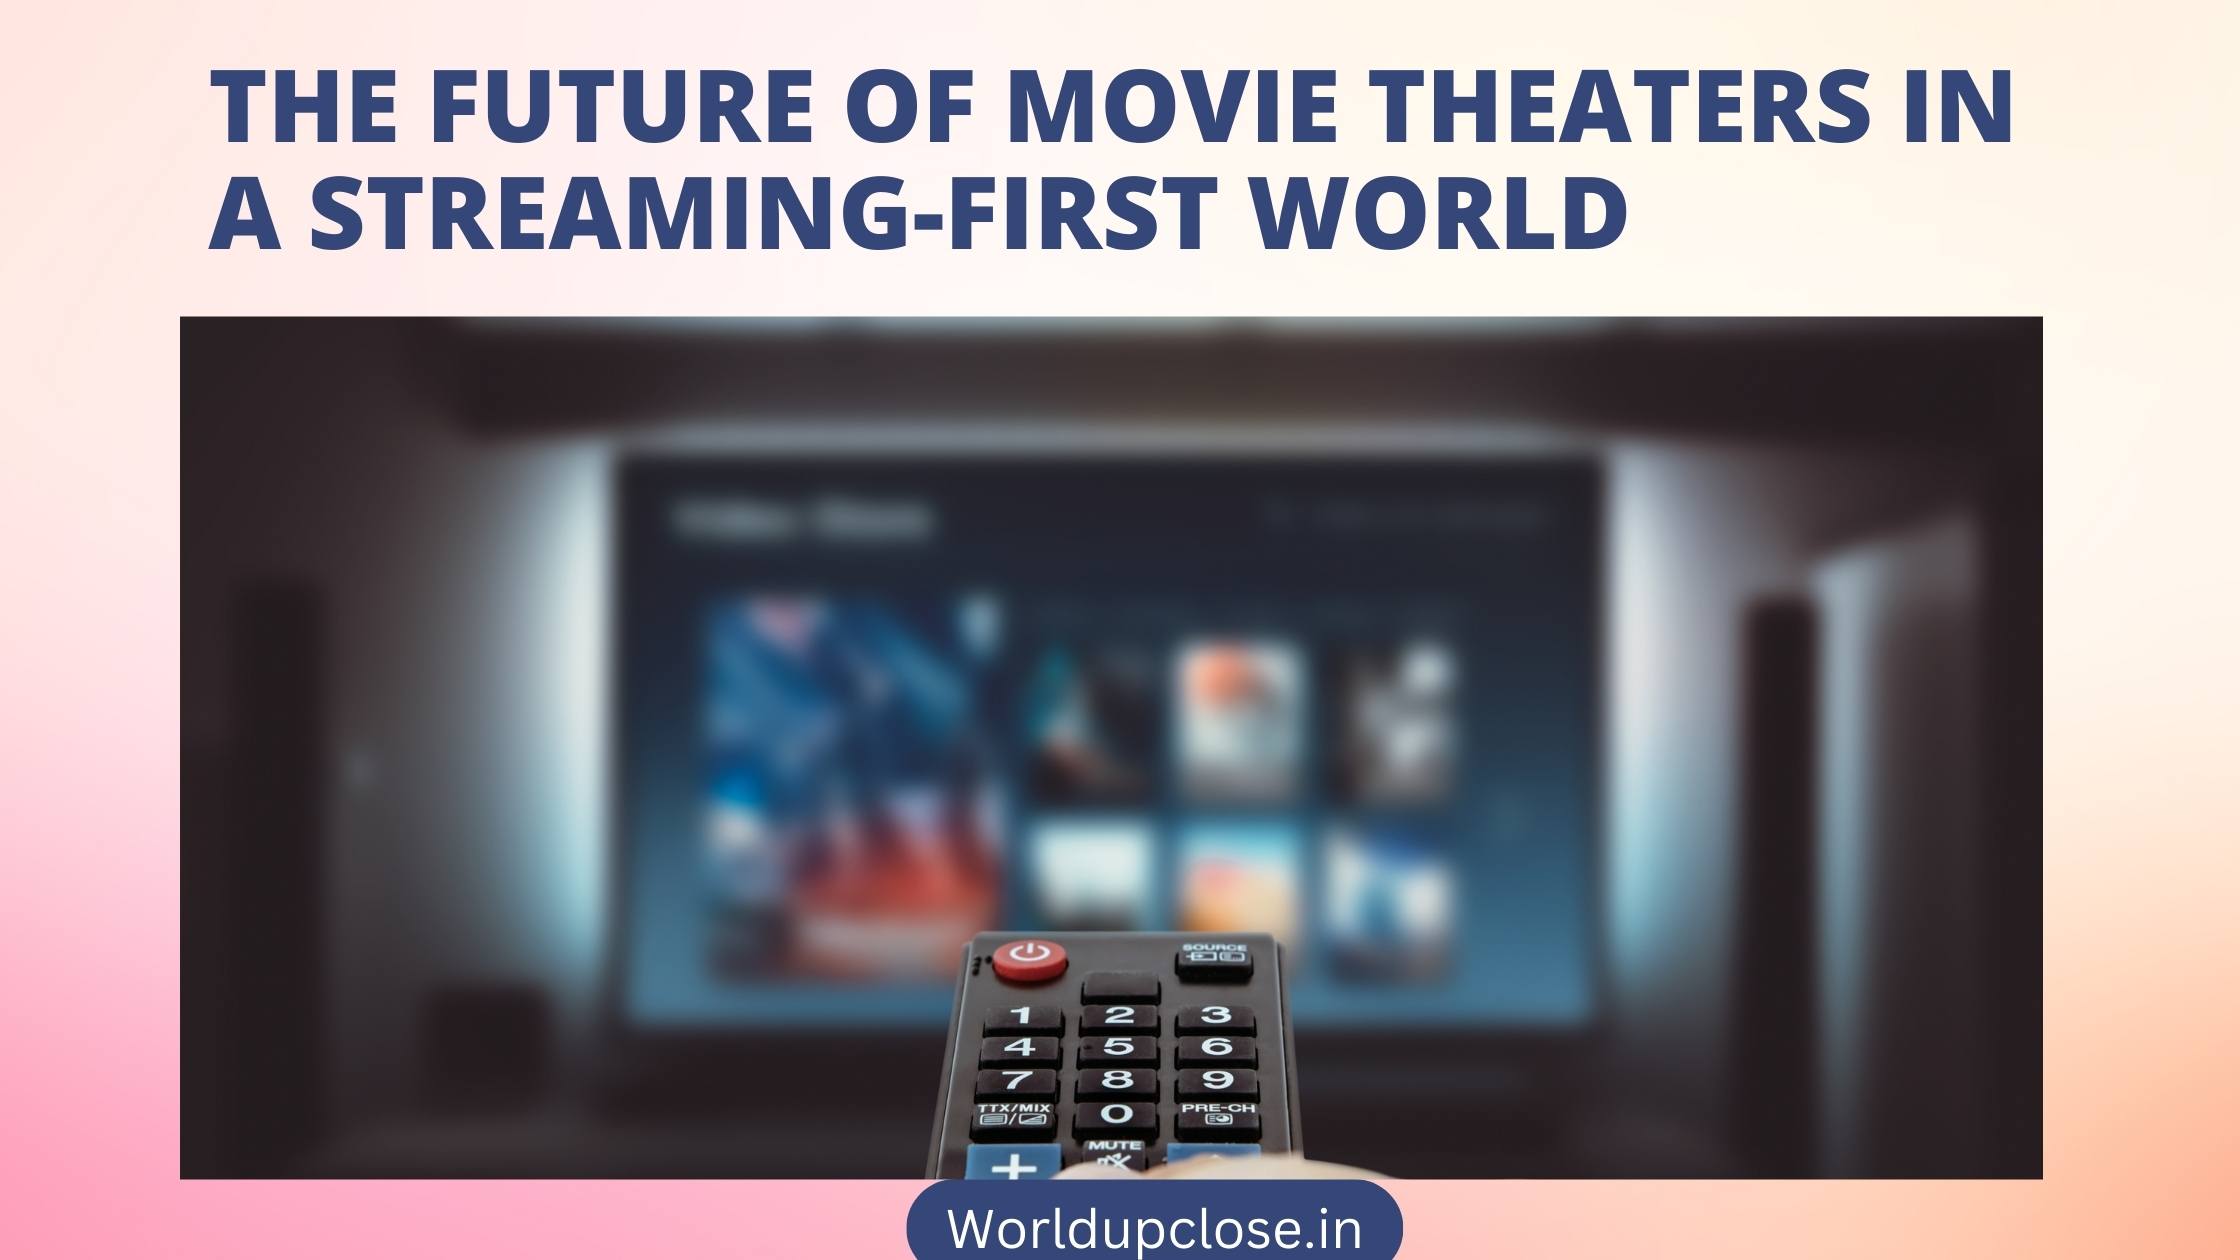 The Future of Movie Theatres in a Streaming-First World 17